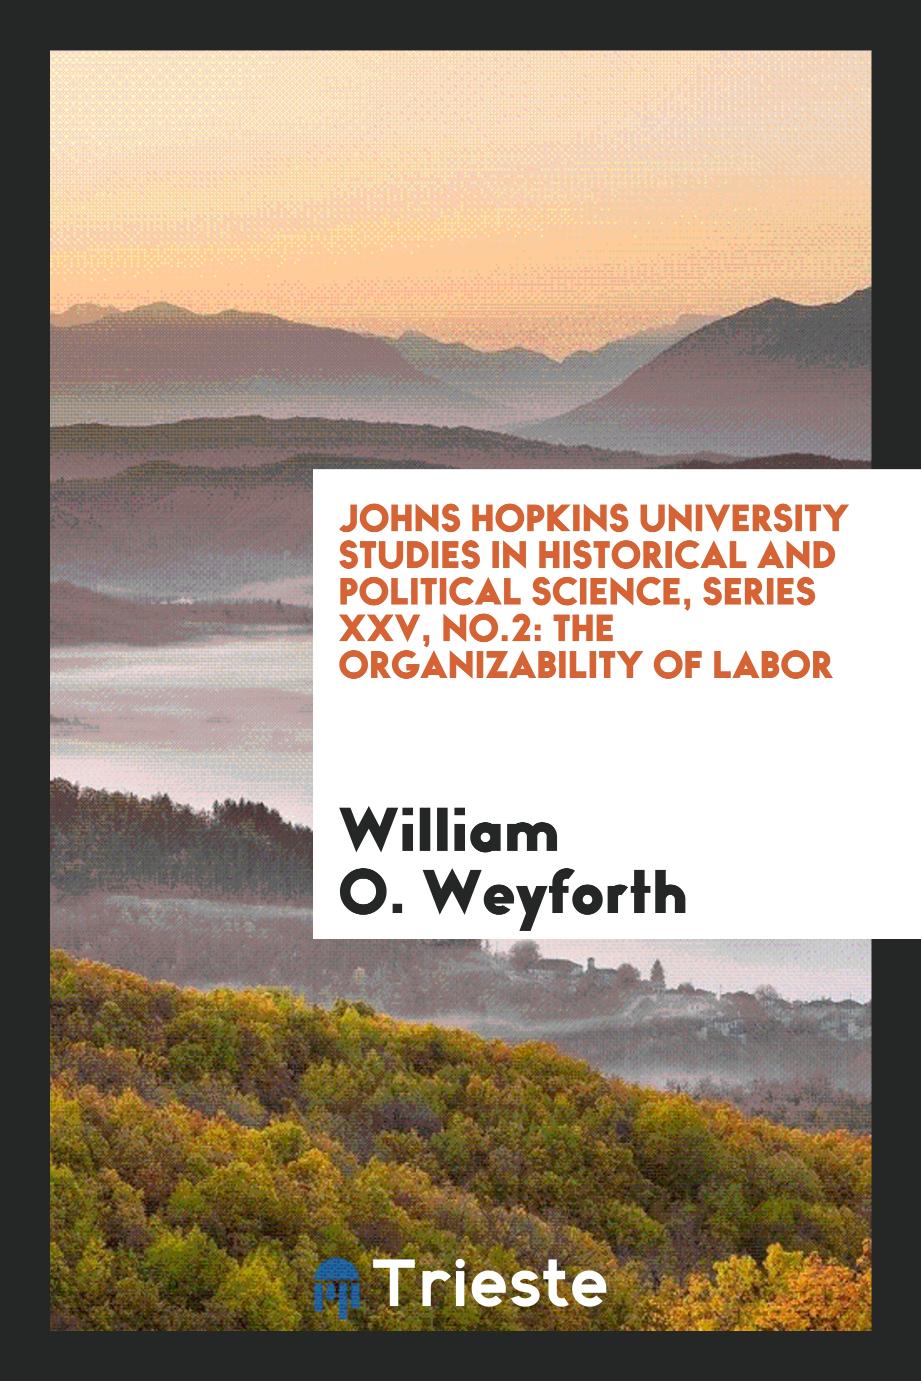 Johns Hopkins University Studies in Historical and Political Science, Series XXV, No.2: The organizability of labor